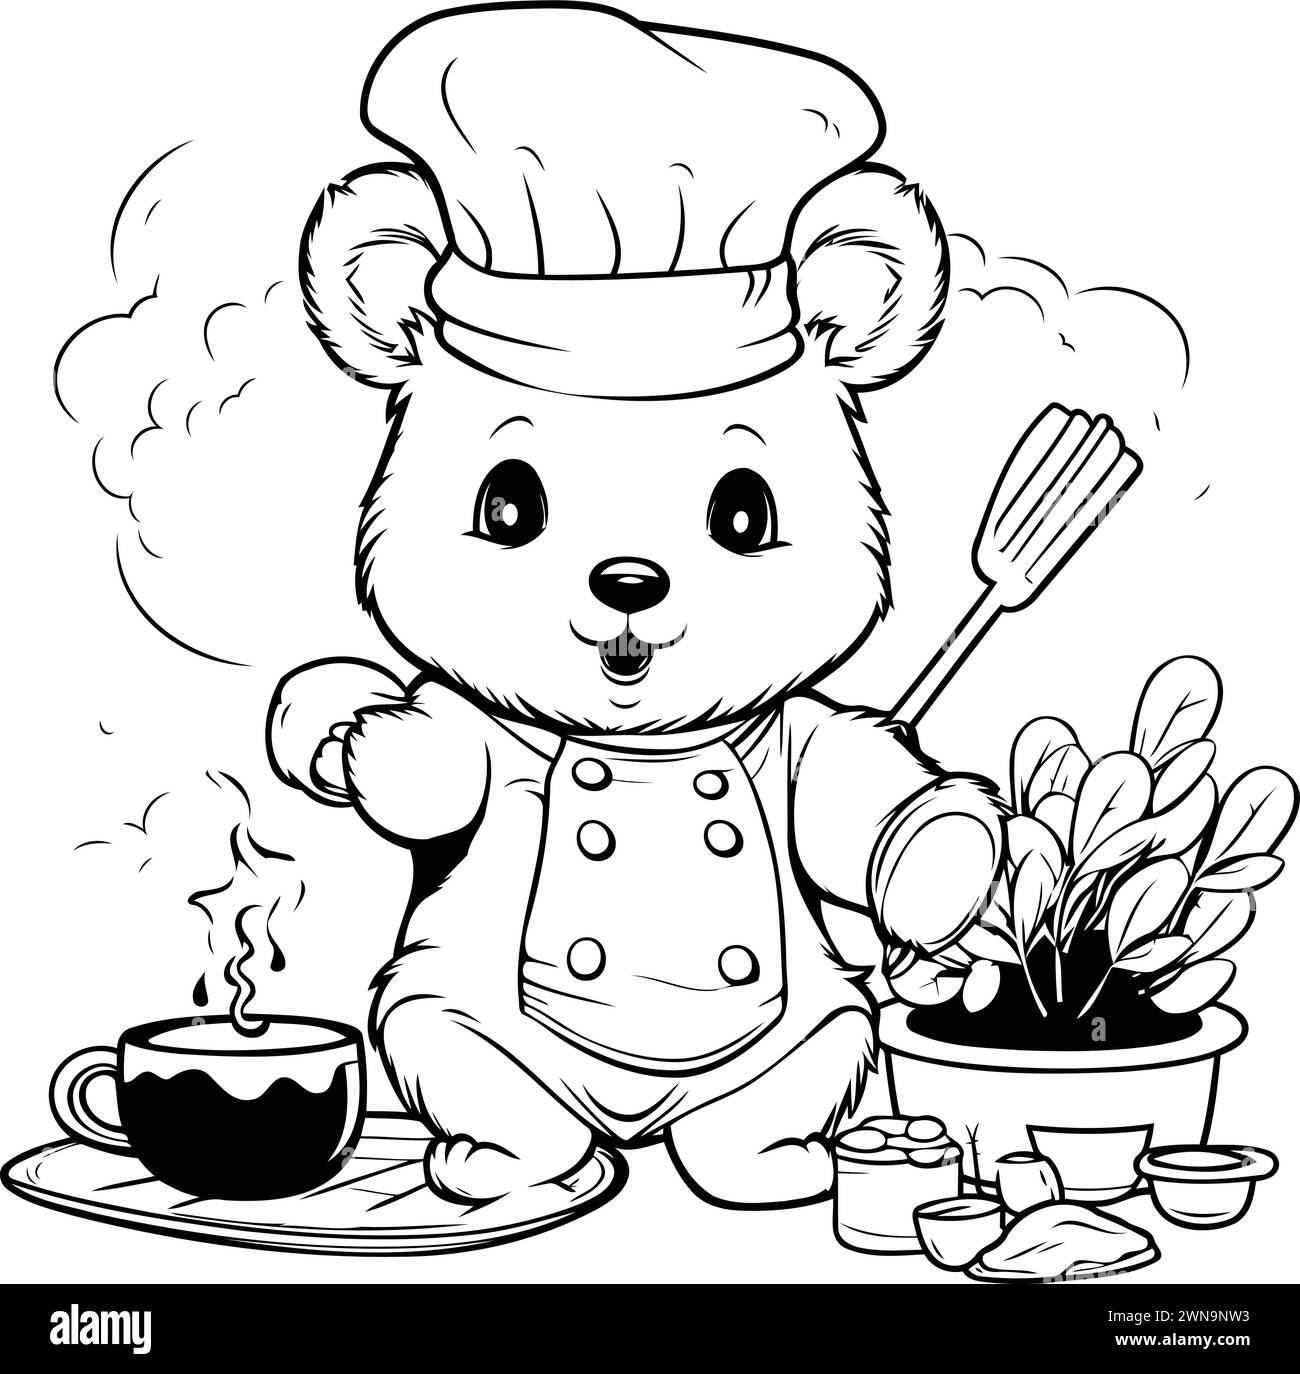 Black and White Cartoon Illustration of Cute Bear Chef for Coloring Book Stock Vector